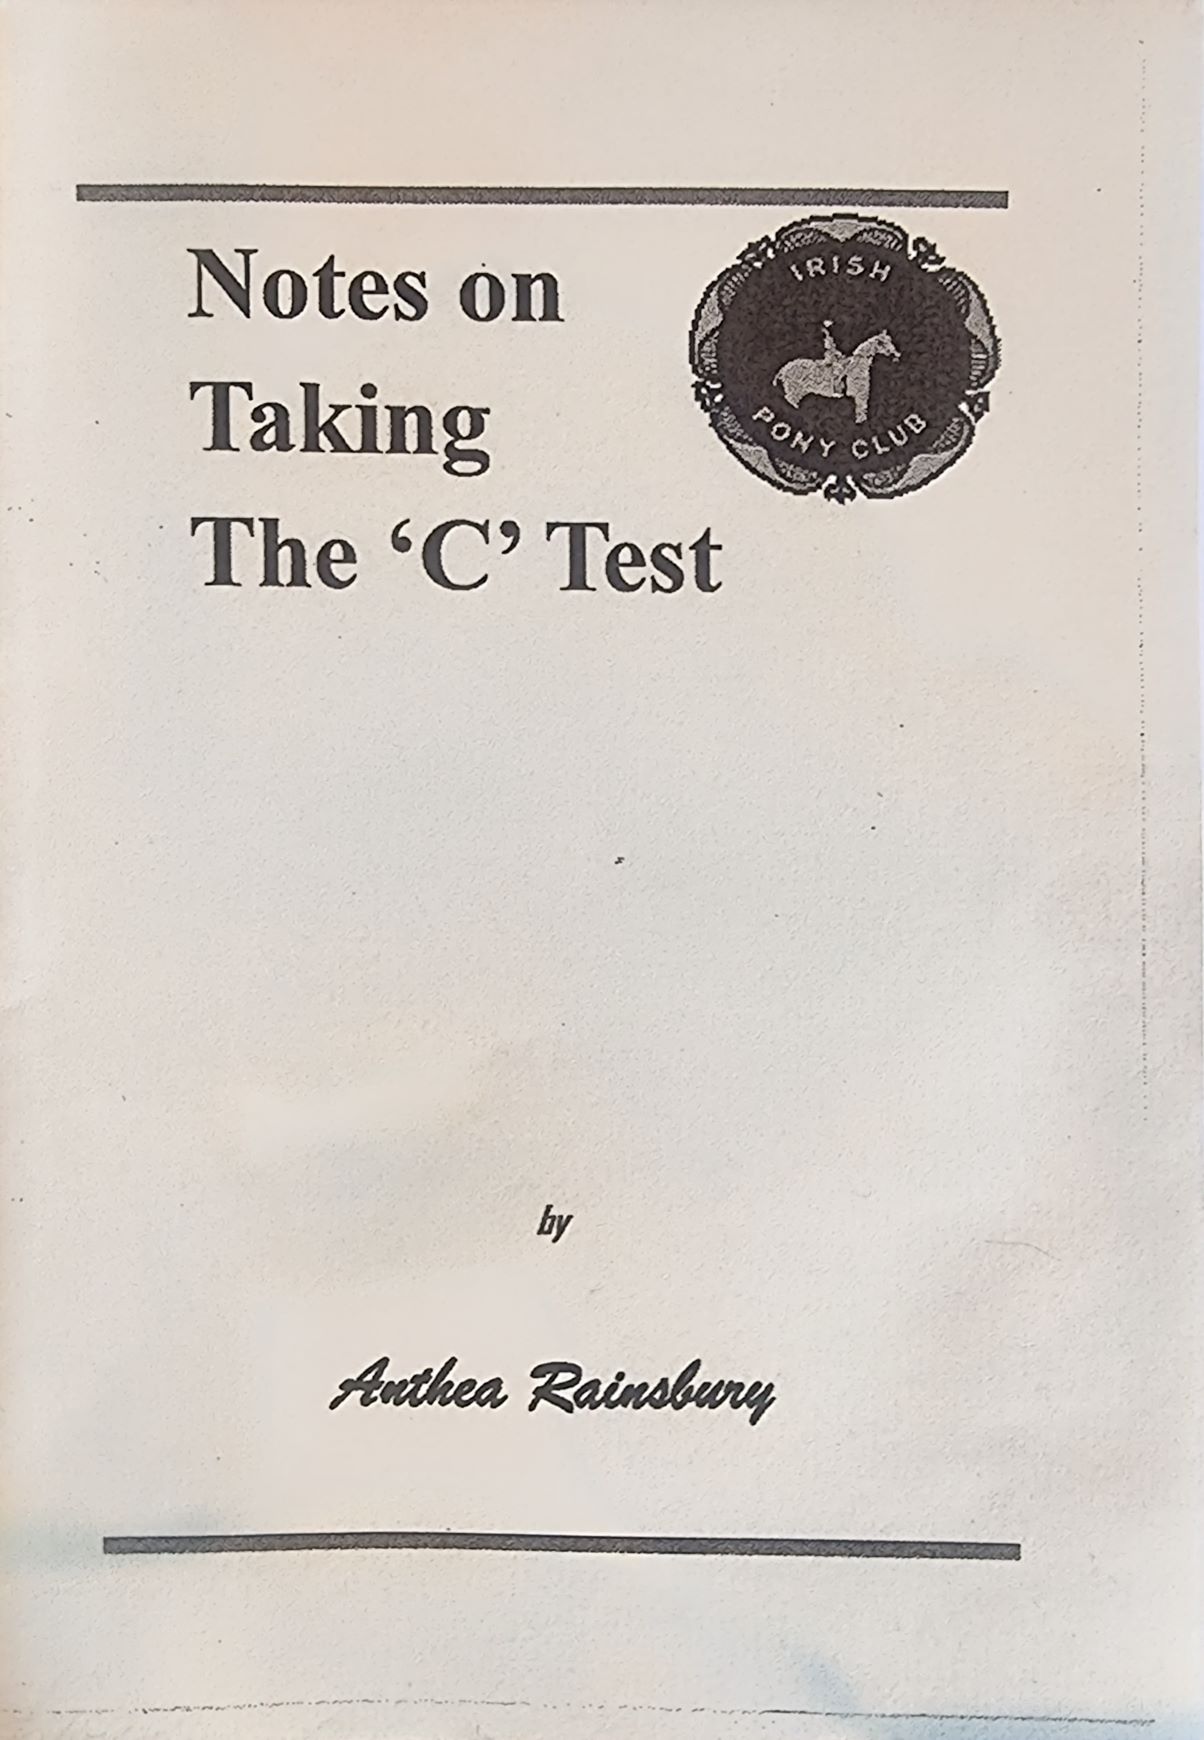 Notes on taking the C Test